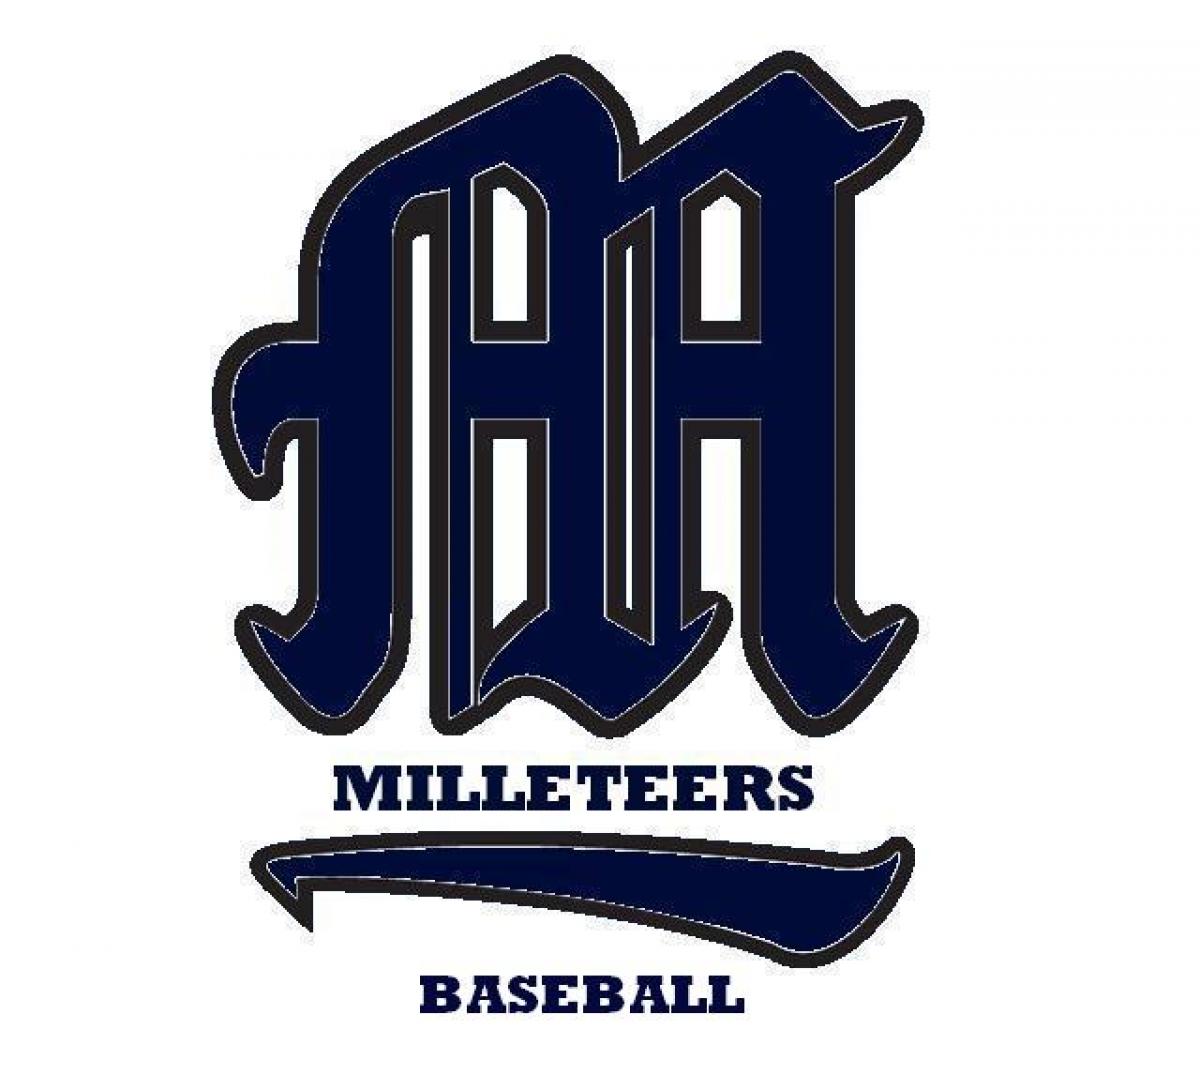 Anstey Powers Milleteers Into Playoffs